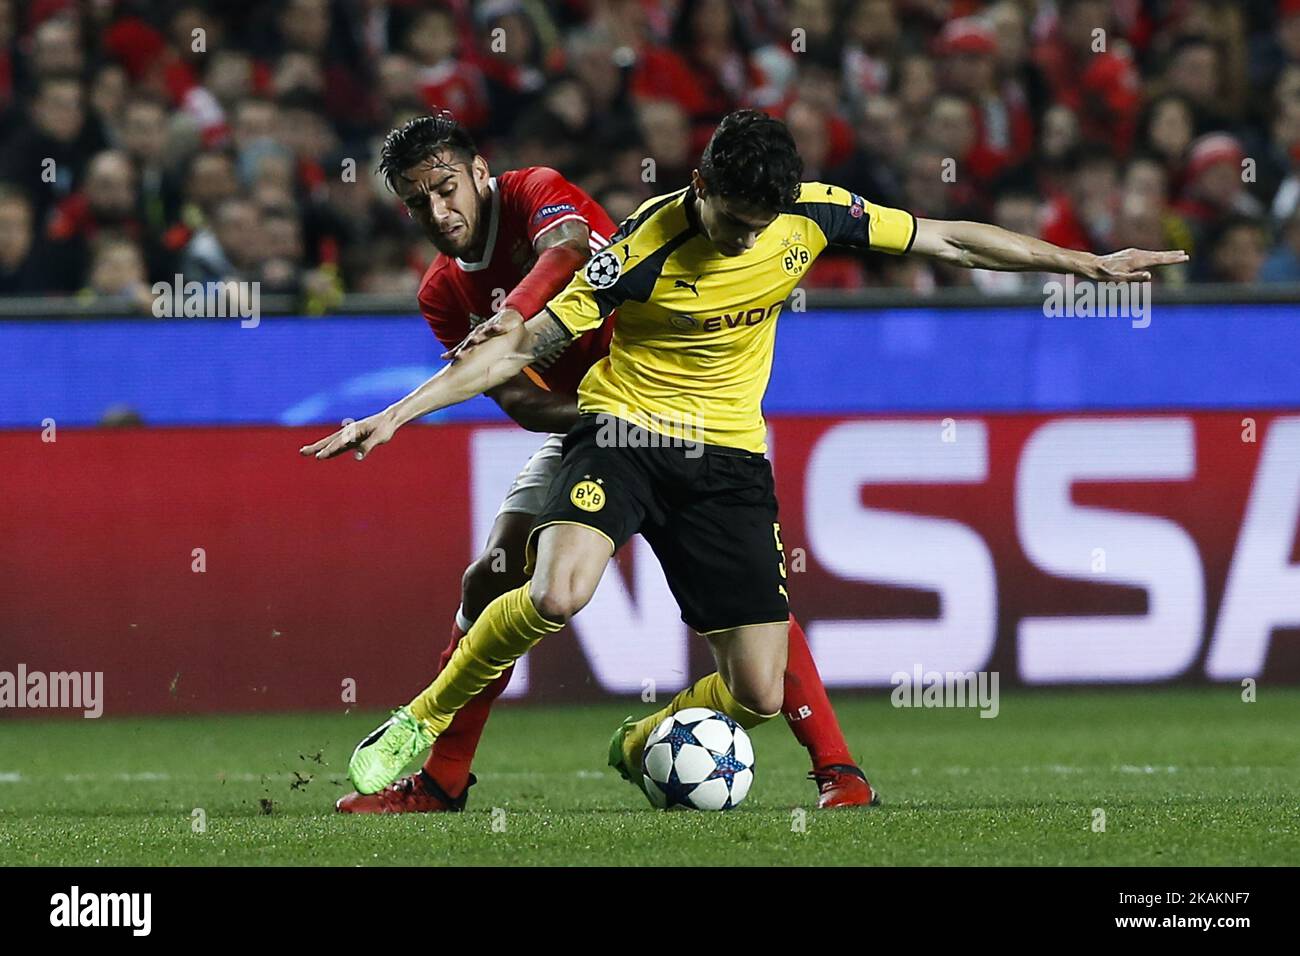 Benfica's forward Eduardo Salvio (L) vies for the ball with Dortmund's defender Bartra (R) during Champions League 2016/17 match between SL Benfica vs BVB Borussia Dortmund, in Lisbon, on February 14, 2017. (Photo by Carlos Palma/NurPhoto) *** Please Use Credit from Credit Field *** Stock Photo